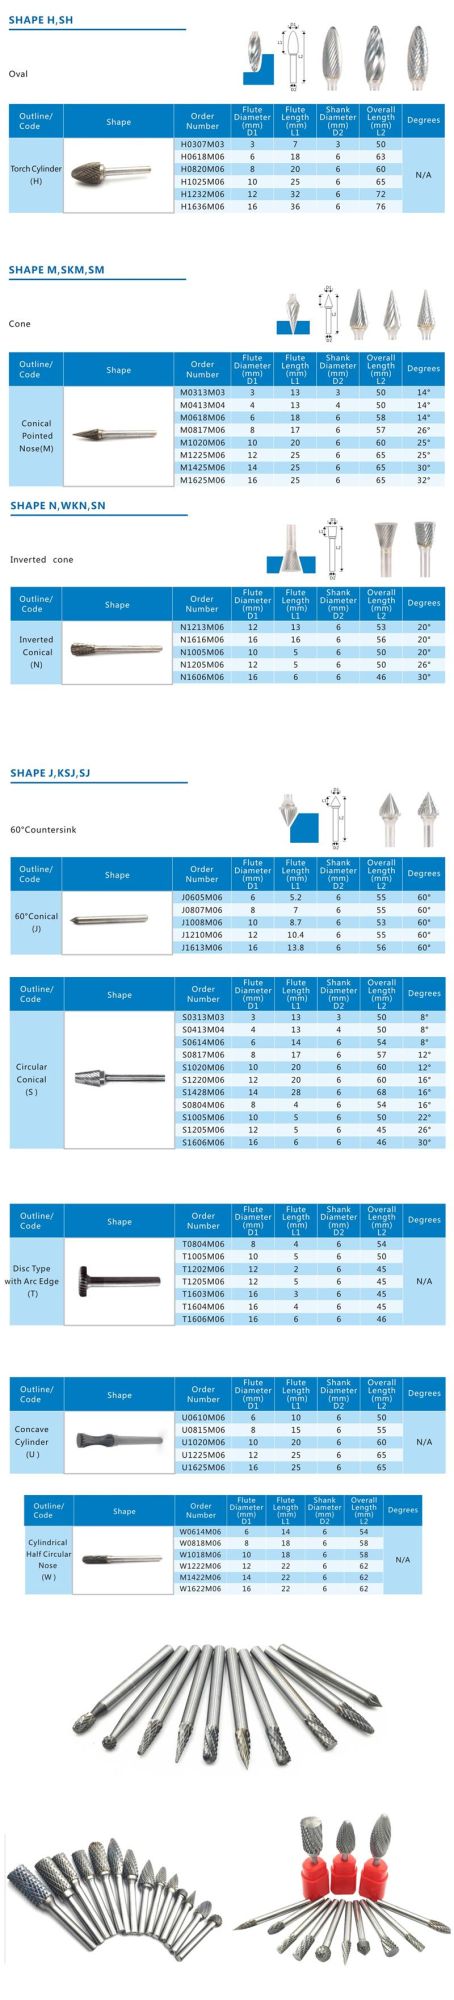 Good Quality Tungsten Carbide Rotary Burrs for Cutting